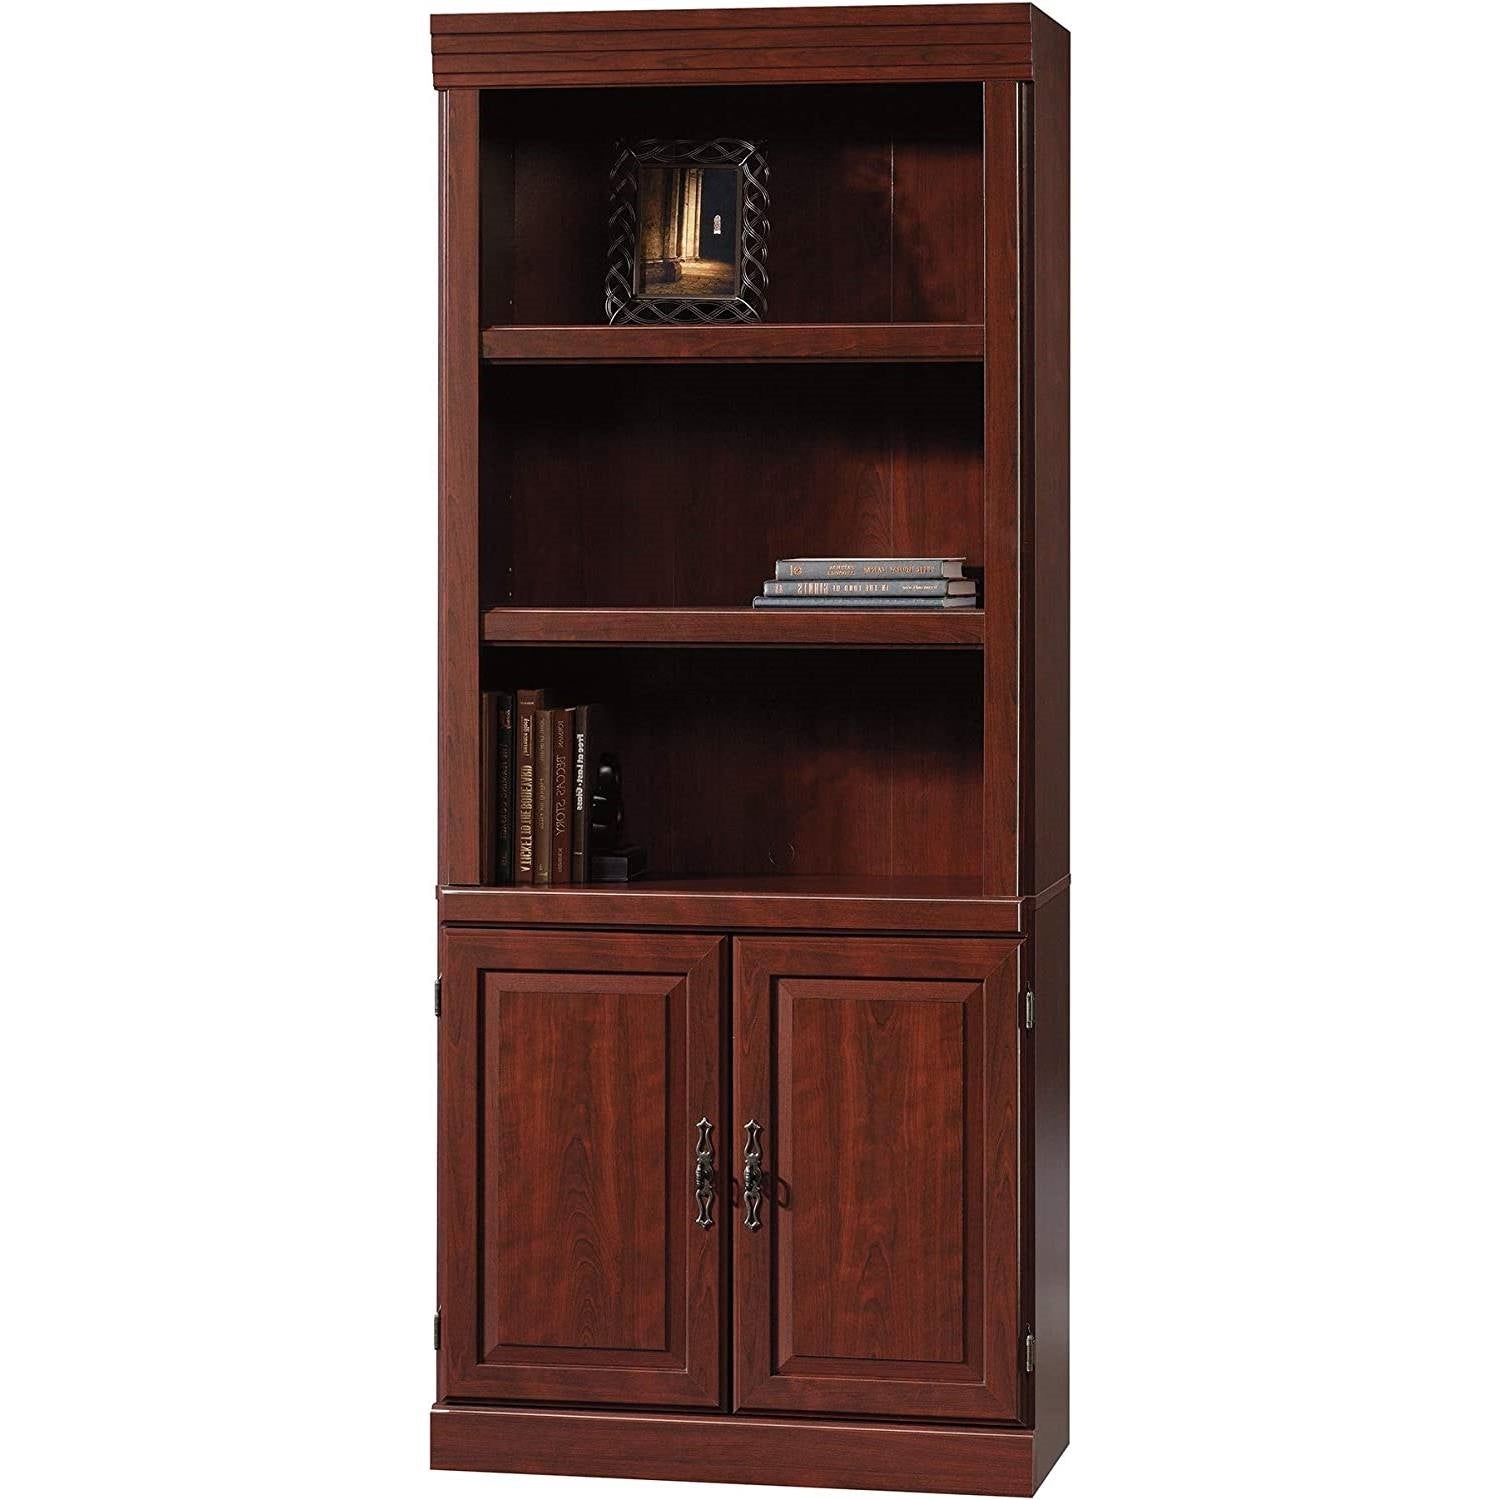 Living Room > Bookcases - 71-inch High 3-Shelf Wooden Bookcase With Storage Drawer In Cherry Finish